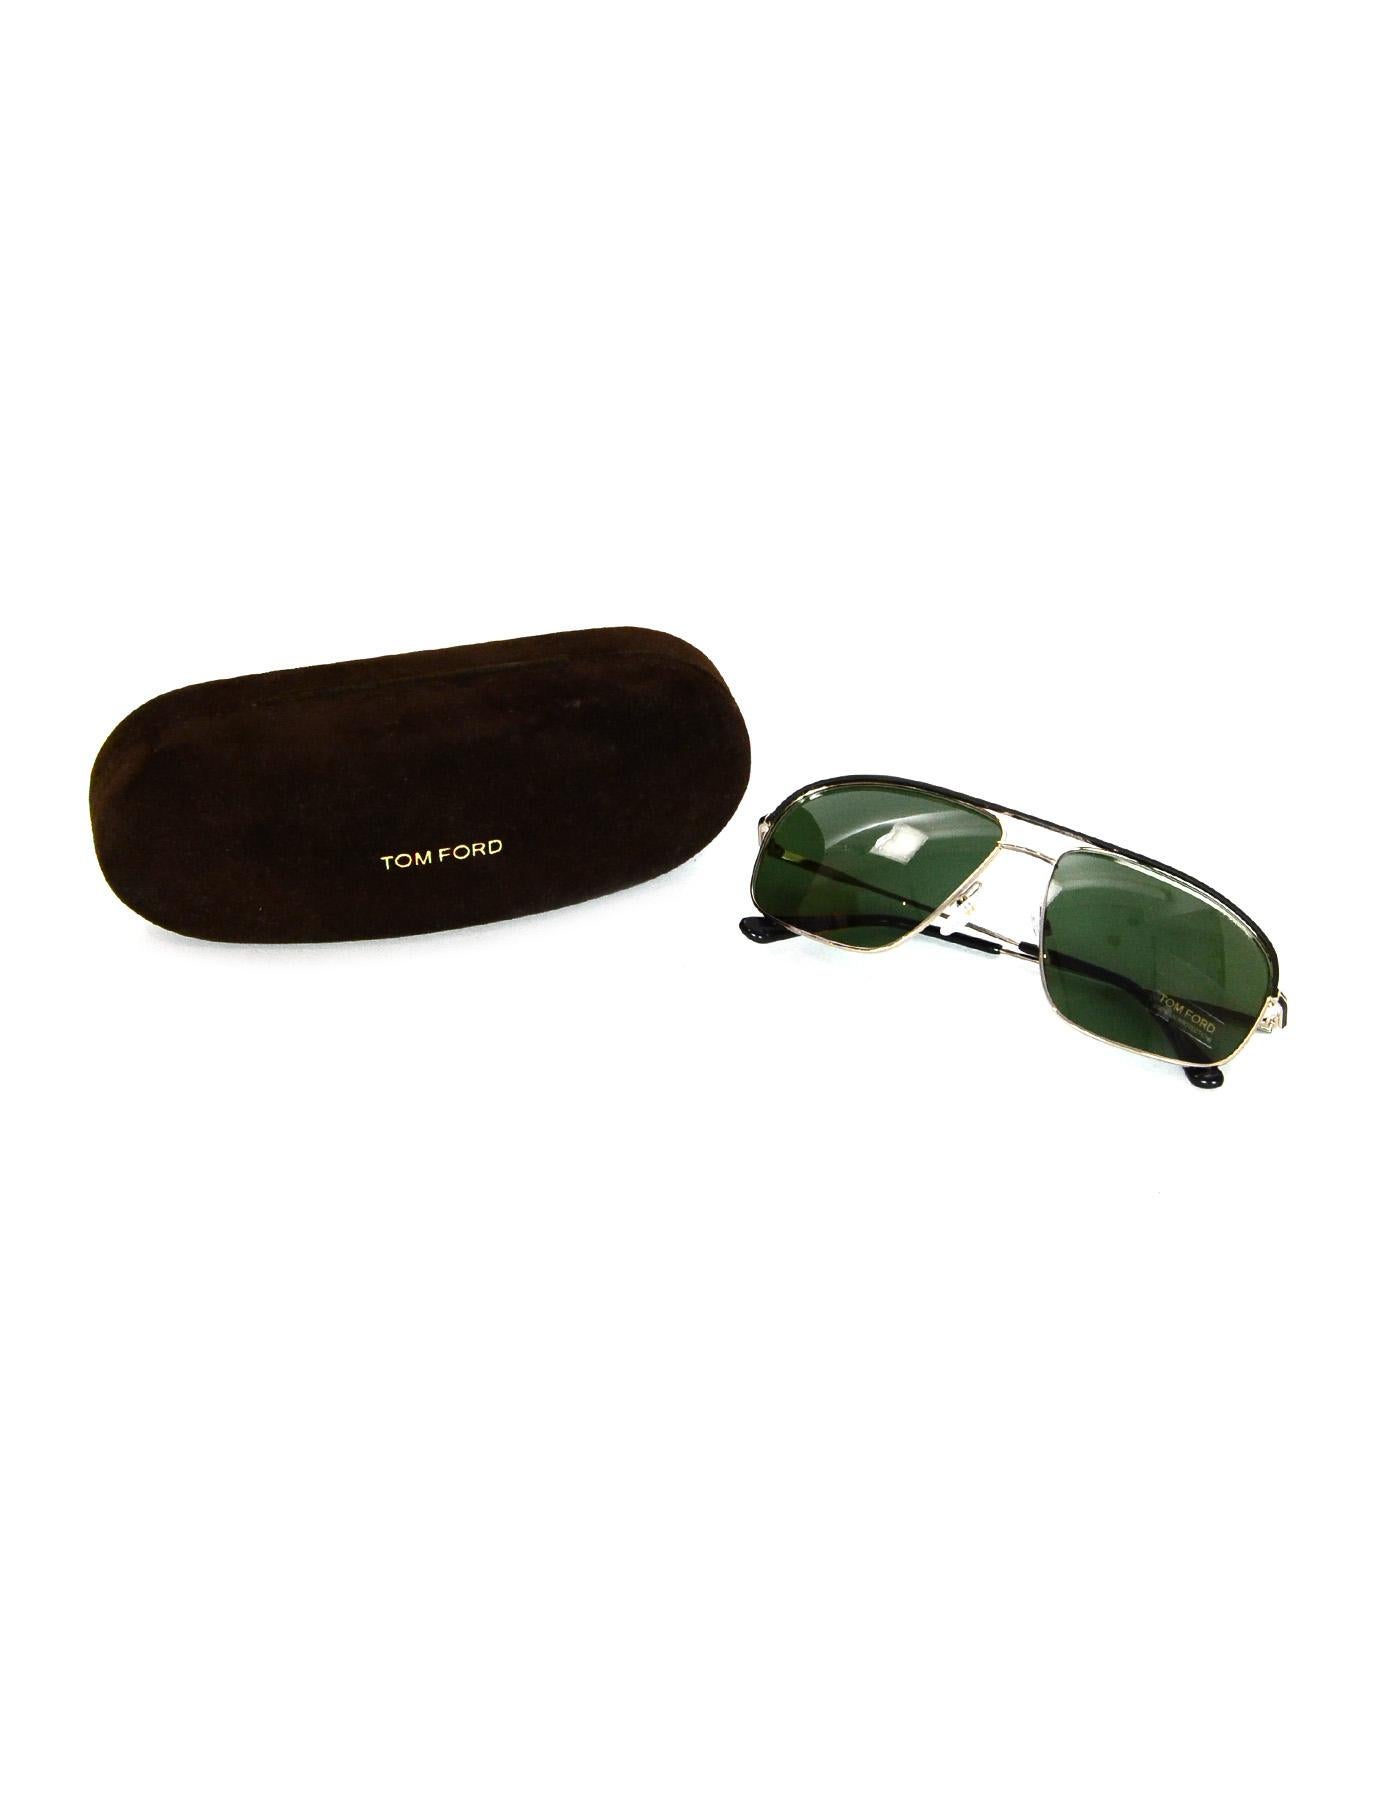 Tom Ford Black/Goldtone Justin Aviator Unisex Sunglasses W/ Case & Cloth 

Made In: Italy
Color: Black and goldtone
Hardware: Goldtone
Materials: Metal, matte black detailing 
Overall Condition: Excellent pre-owned condition with minor marks in